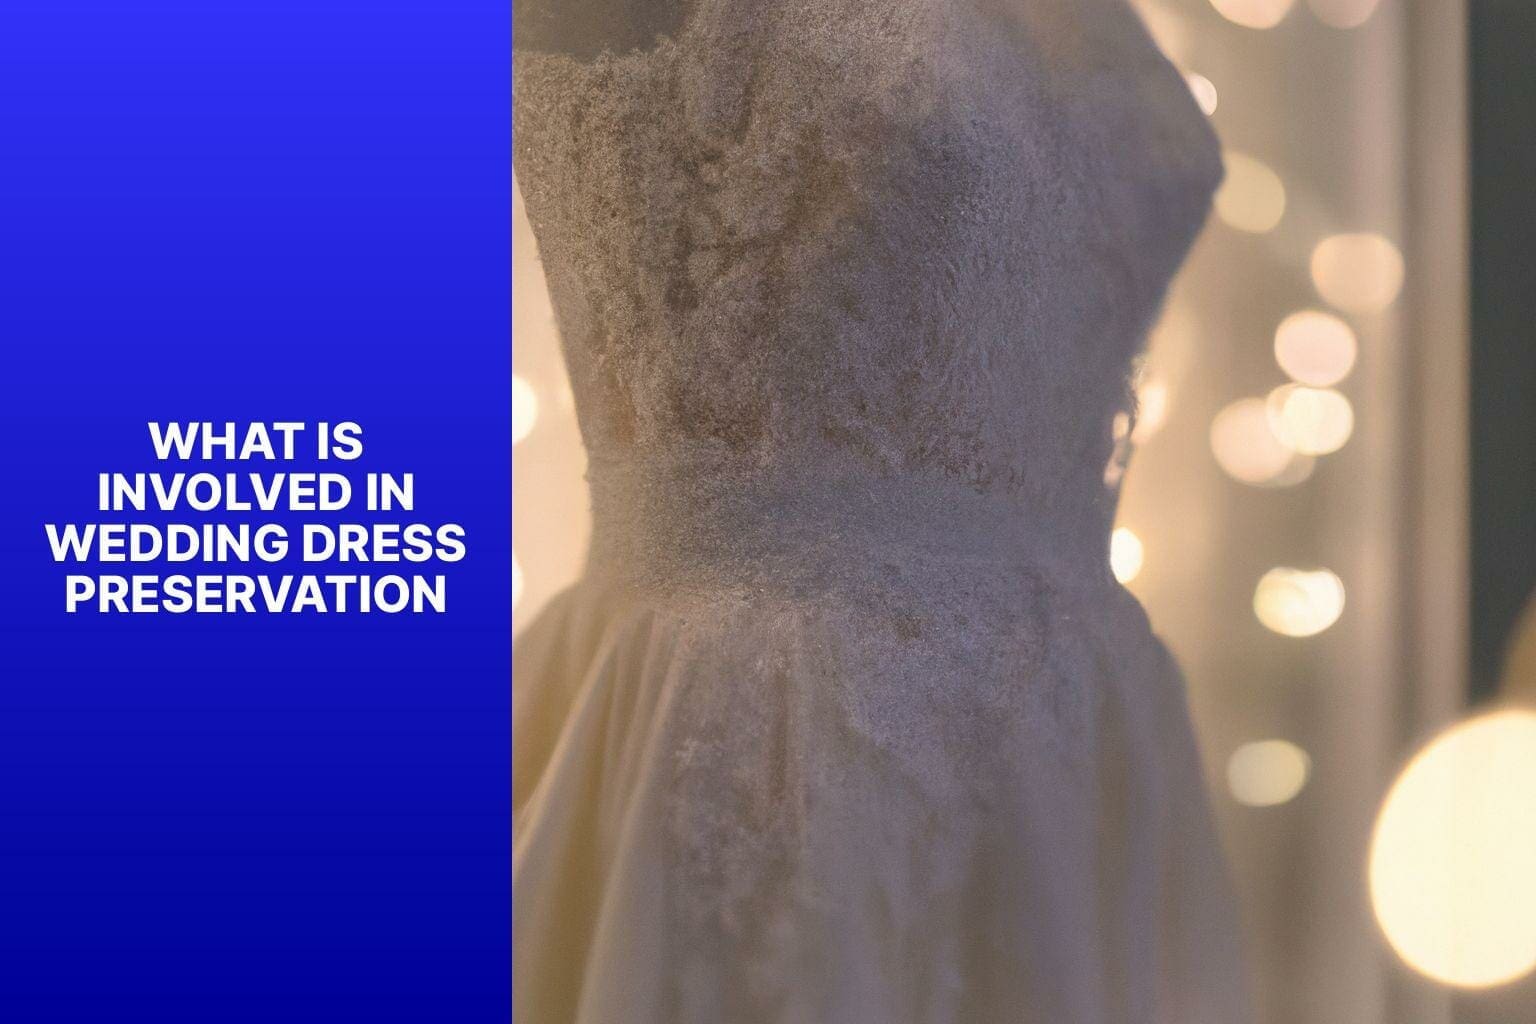 What is involved in wedding gown preservation and presentation?